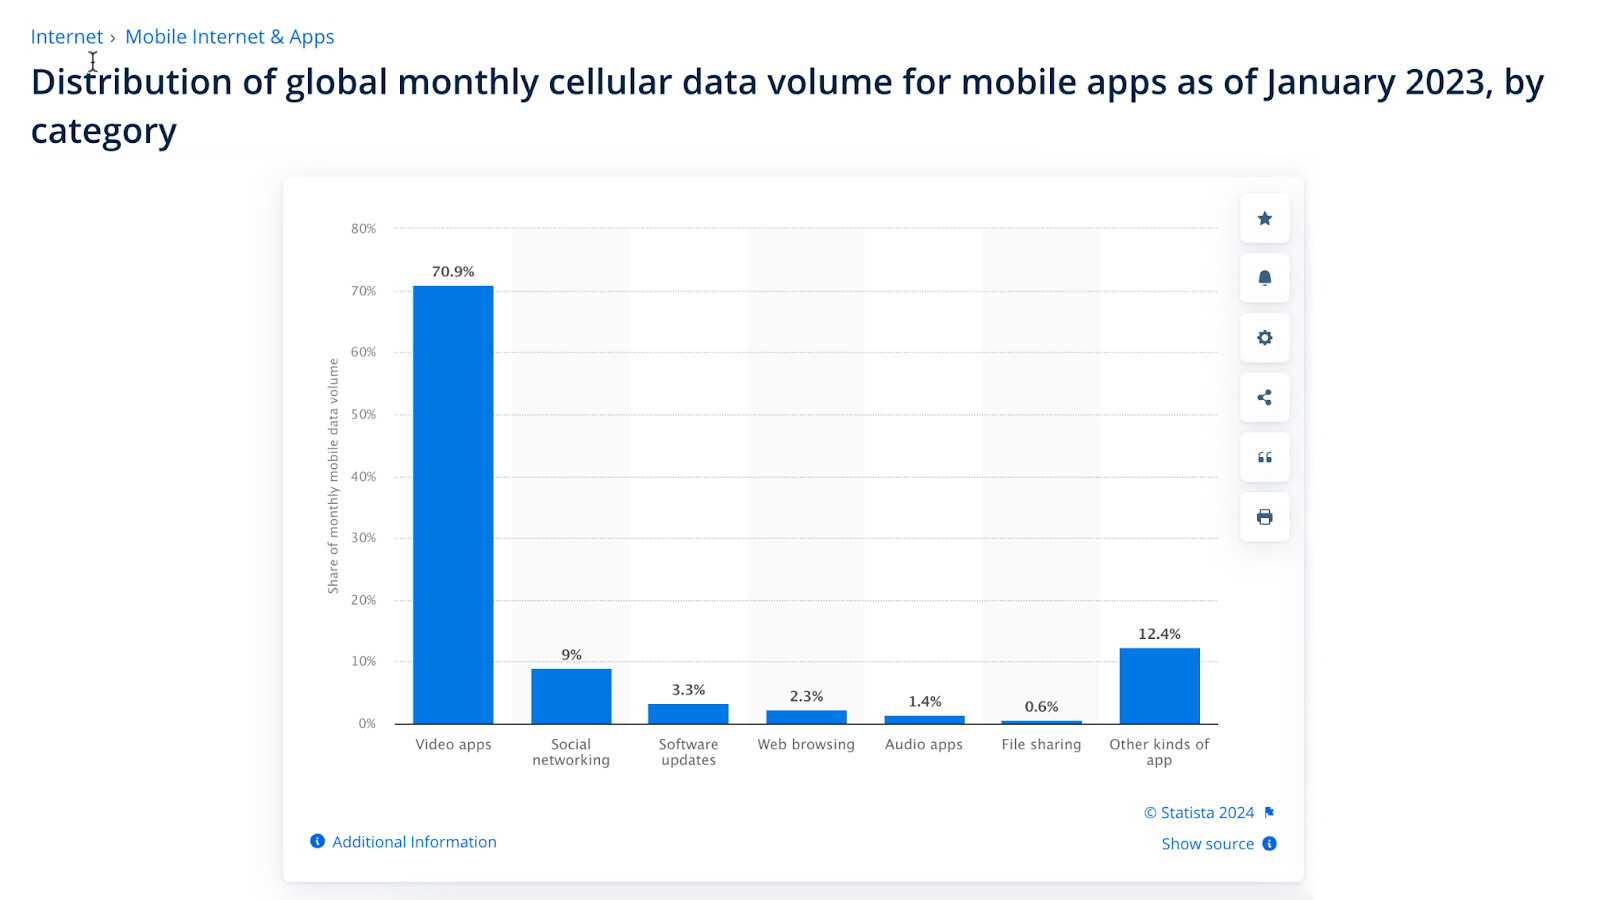 Global monthly cellular data volume for mobile apps